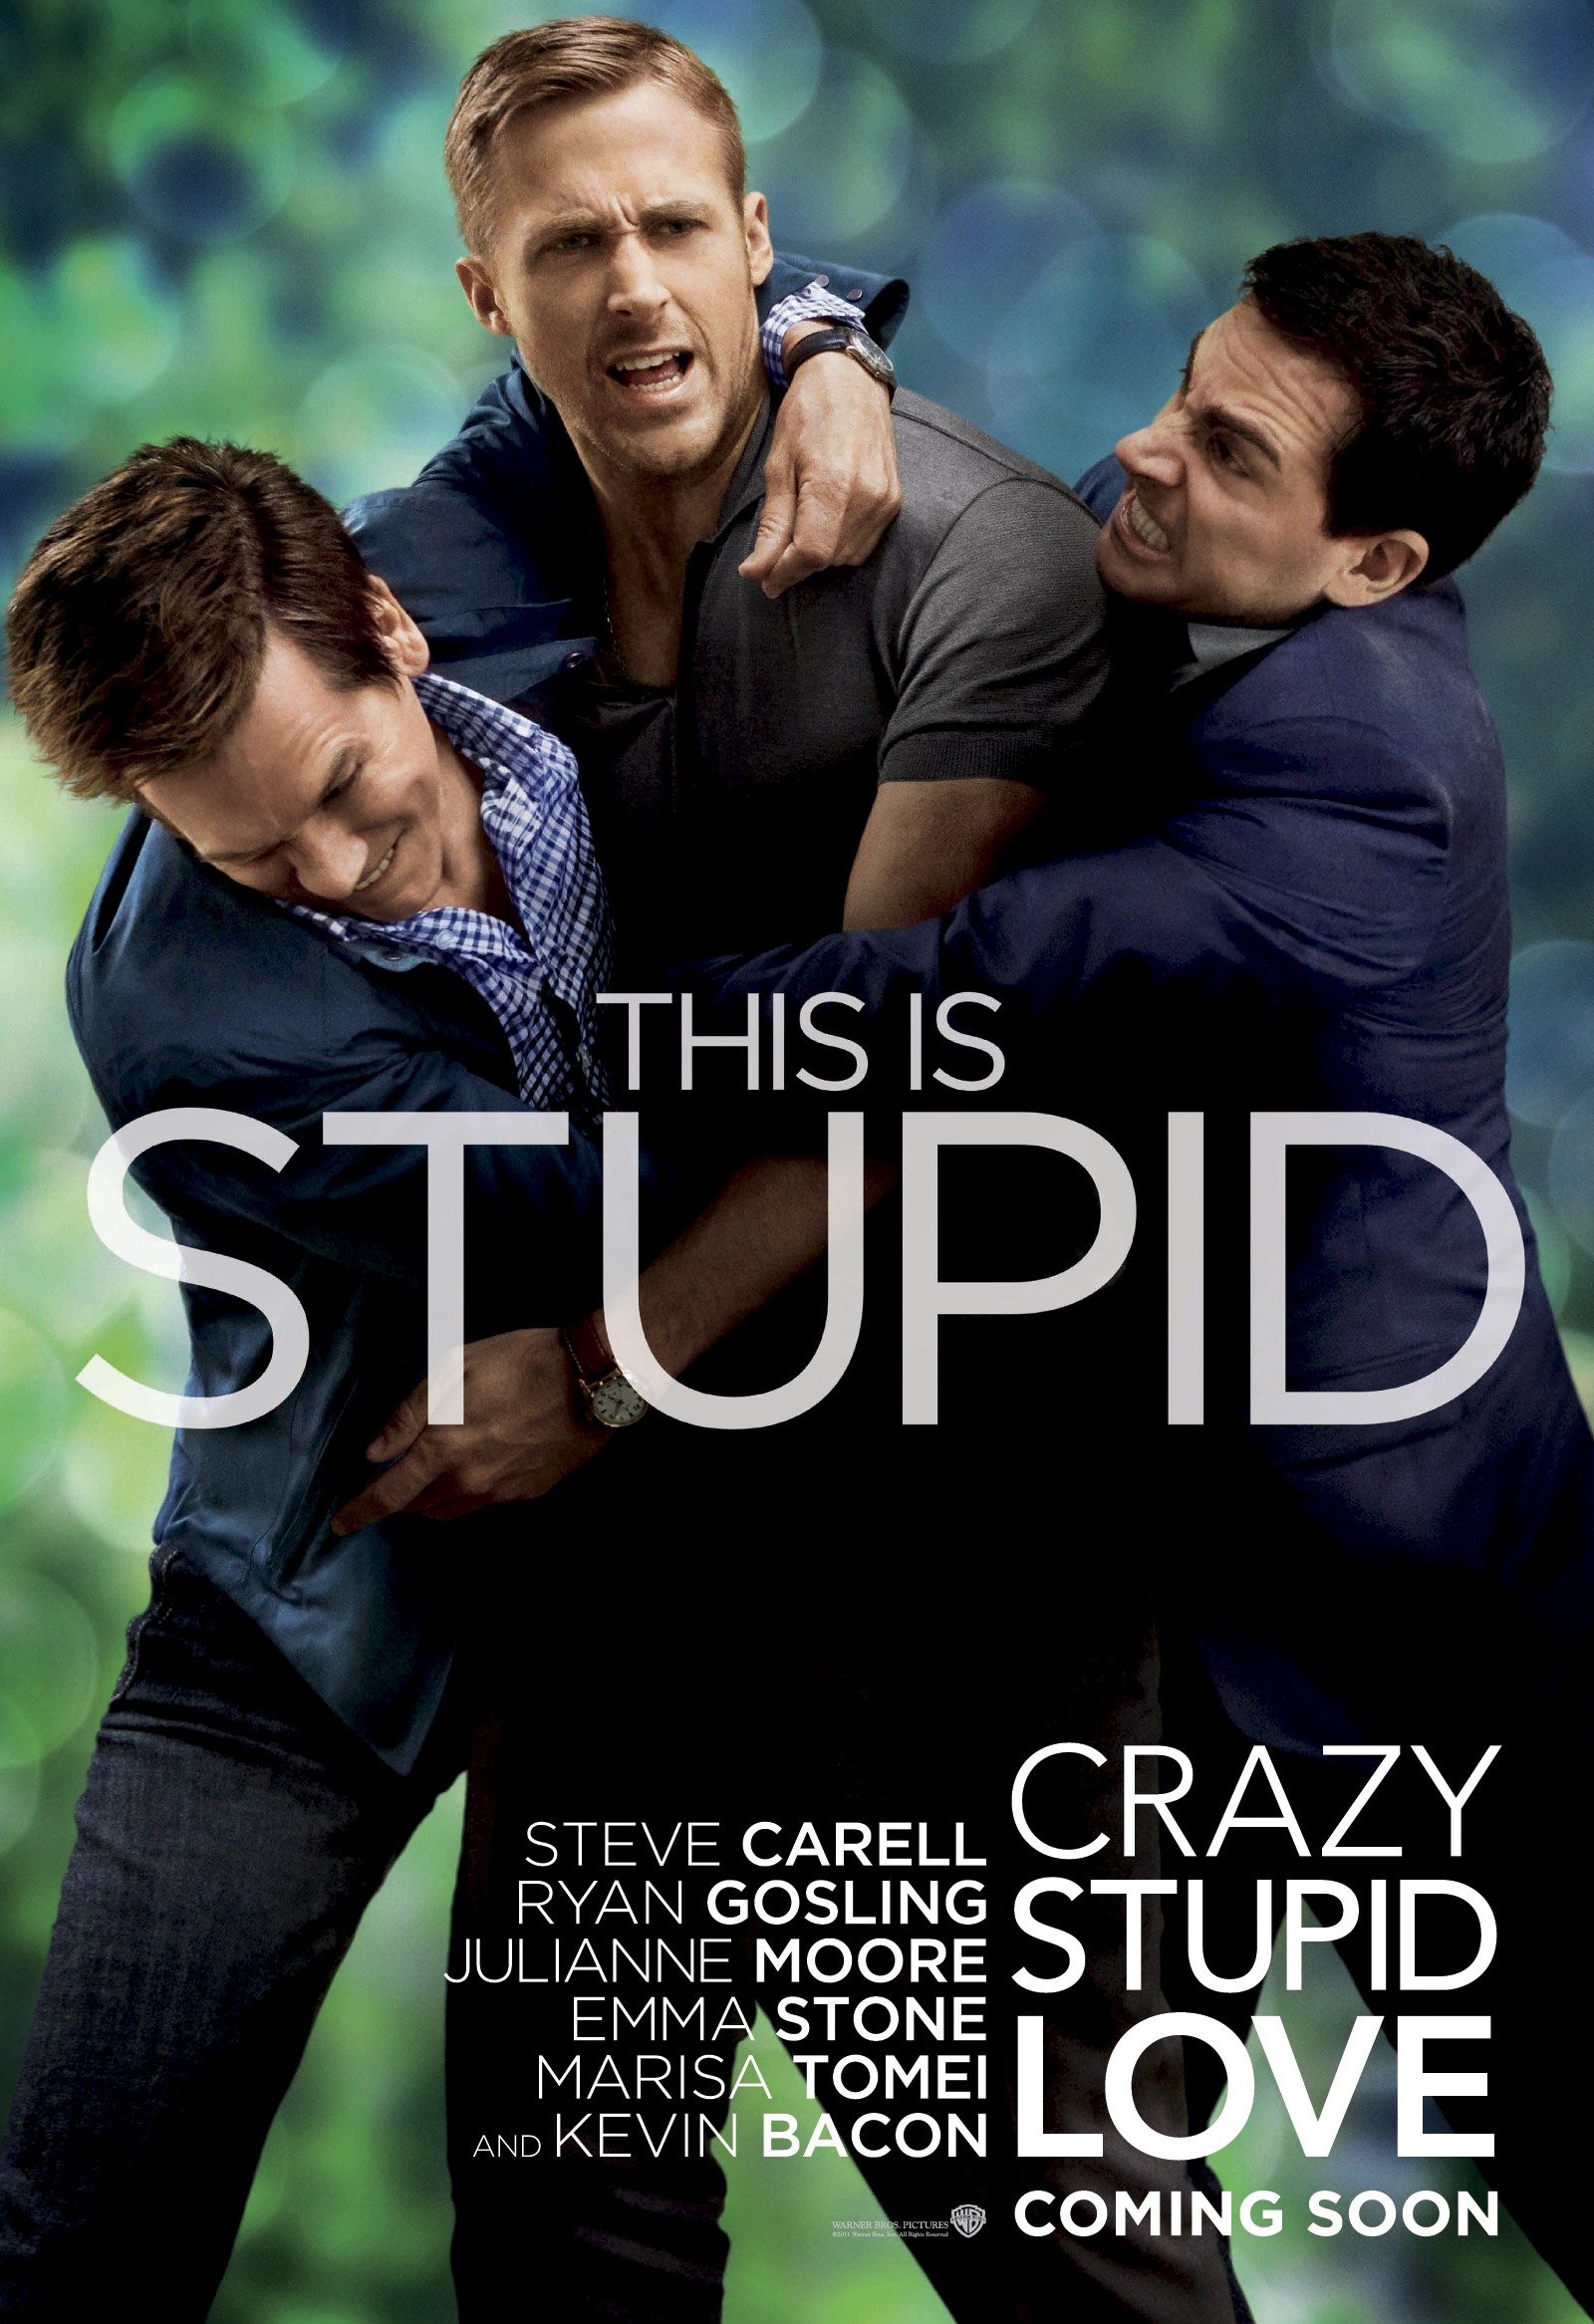 Mega Sized Movie Poster Image for Crazy, Stupid, Love. (#6 of 7)